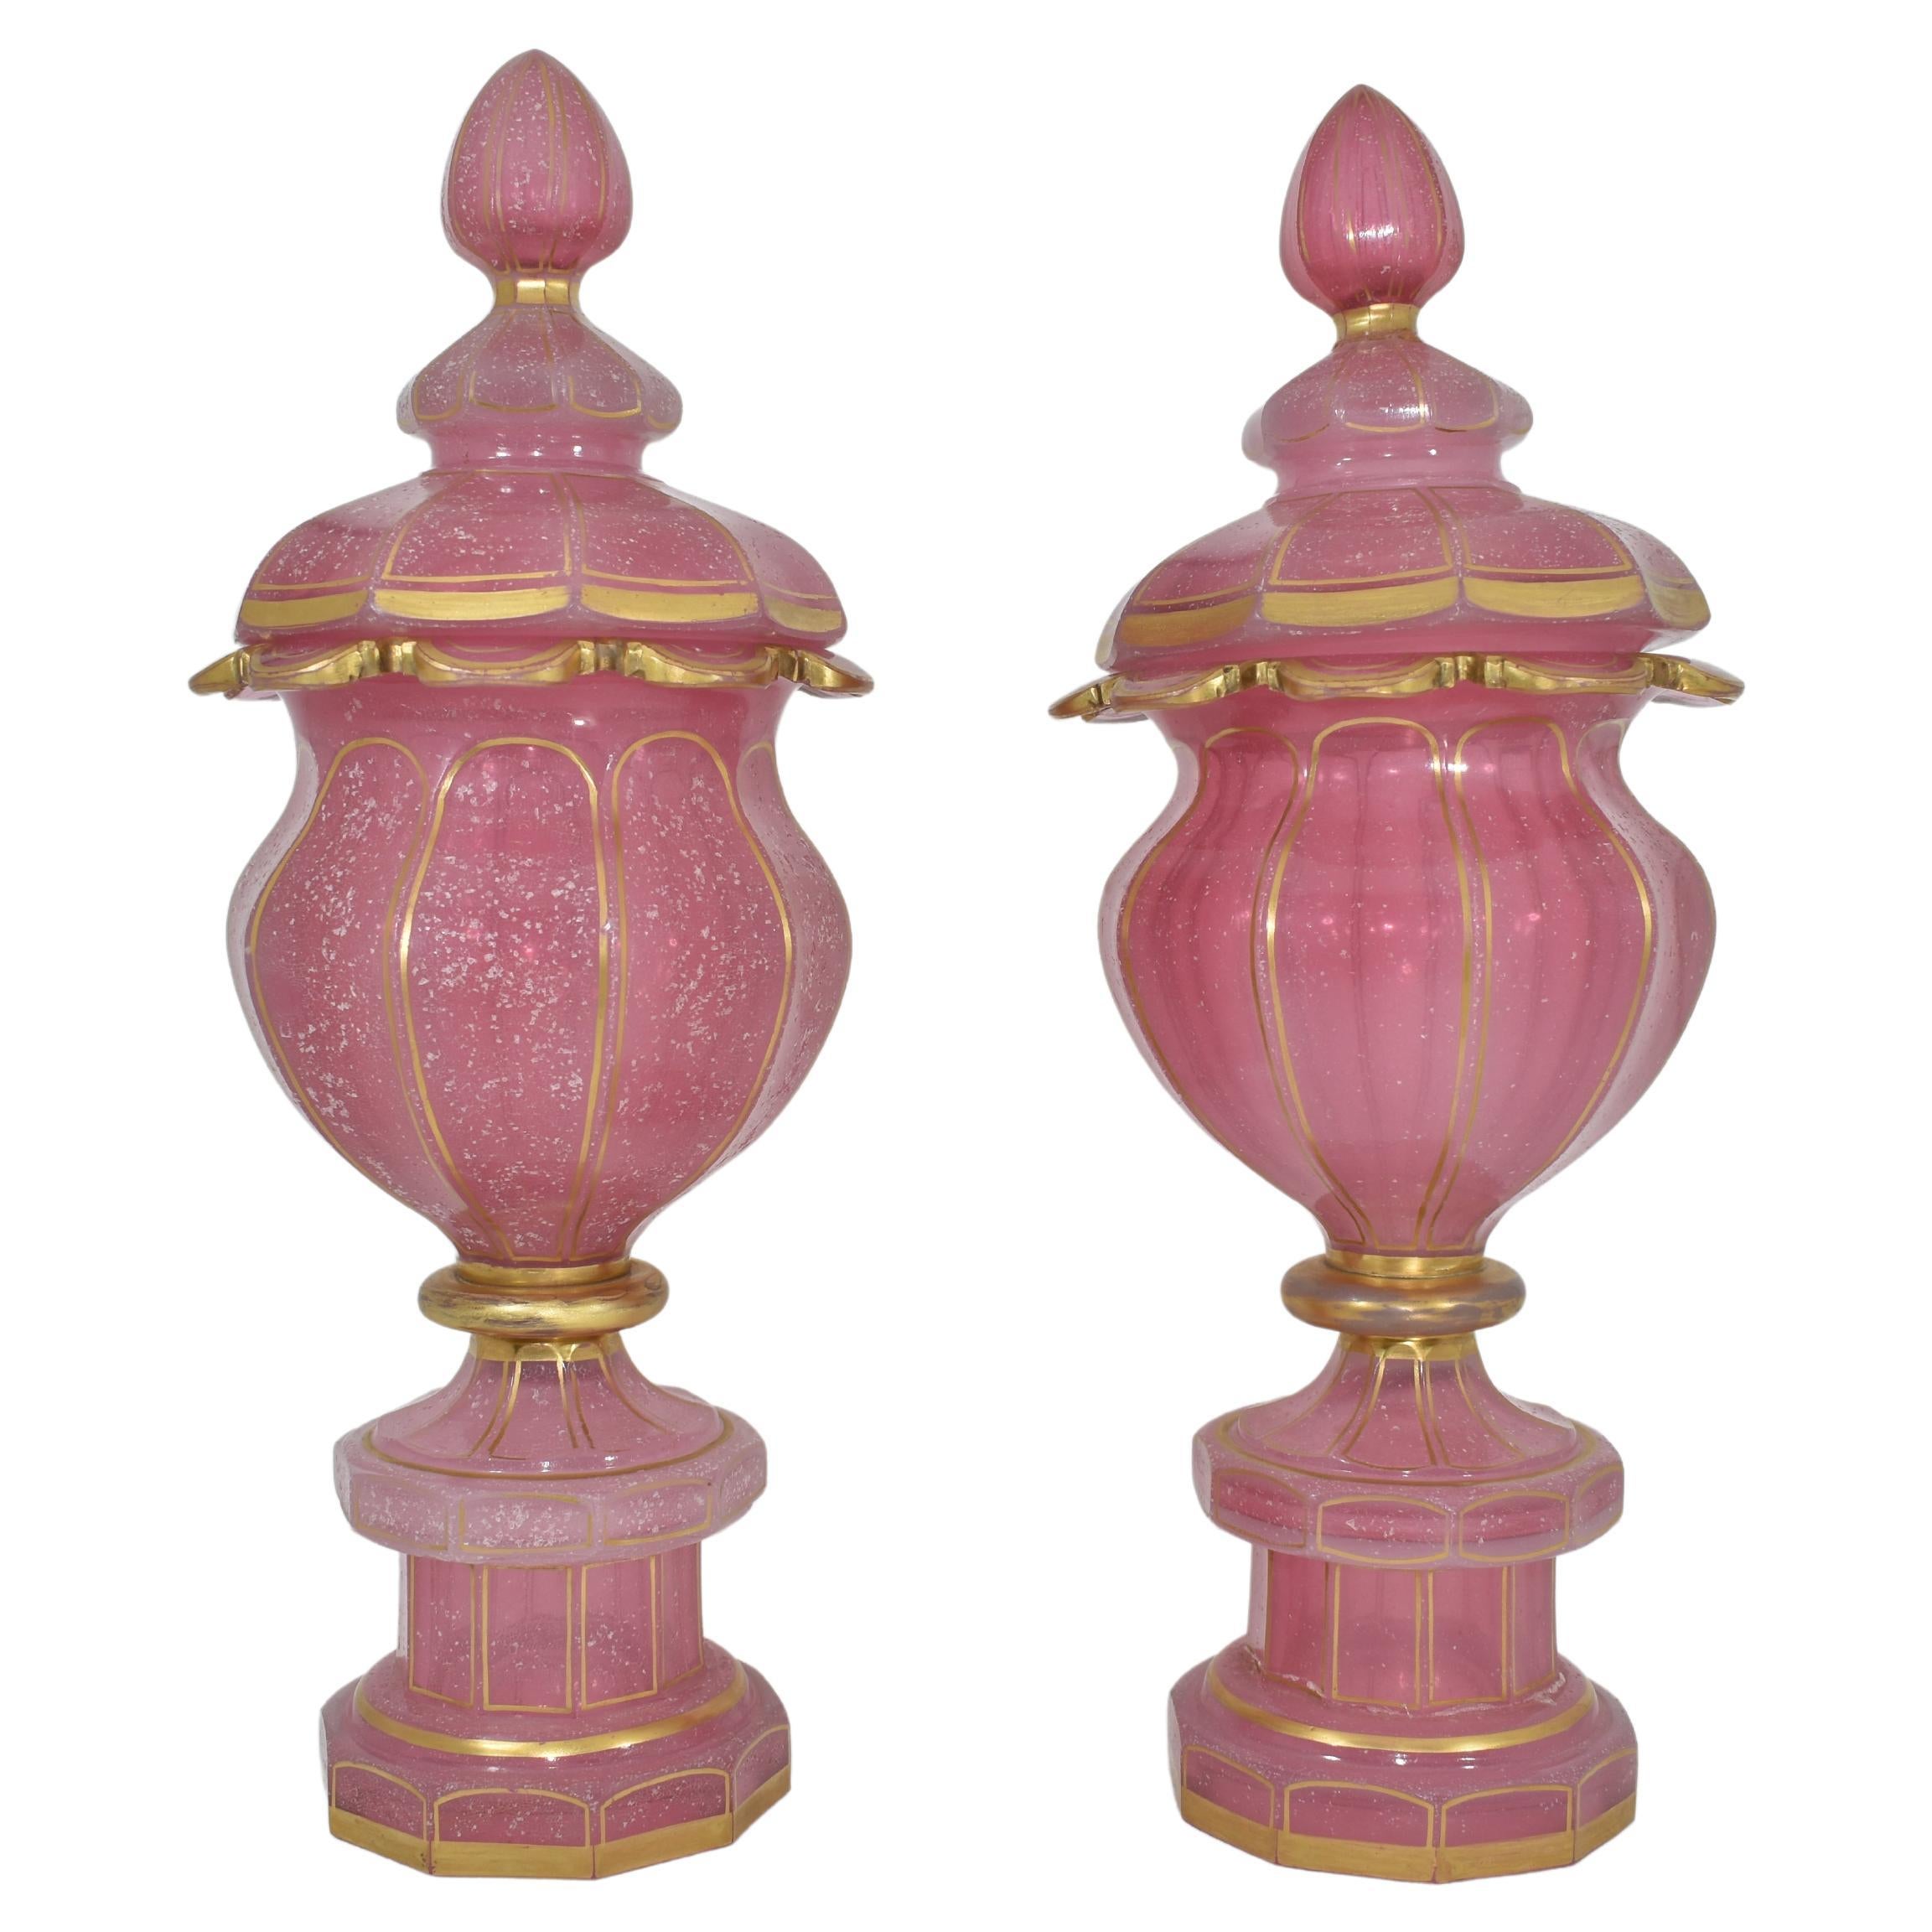 The pink alabaster glass pair of goblets embody the beauty of 19th century opal glass manufacture, Gilt all over, the vase is shaped in 10 side panels and features  turned-out necks with scalloped edges, further gilding on the base and cover,